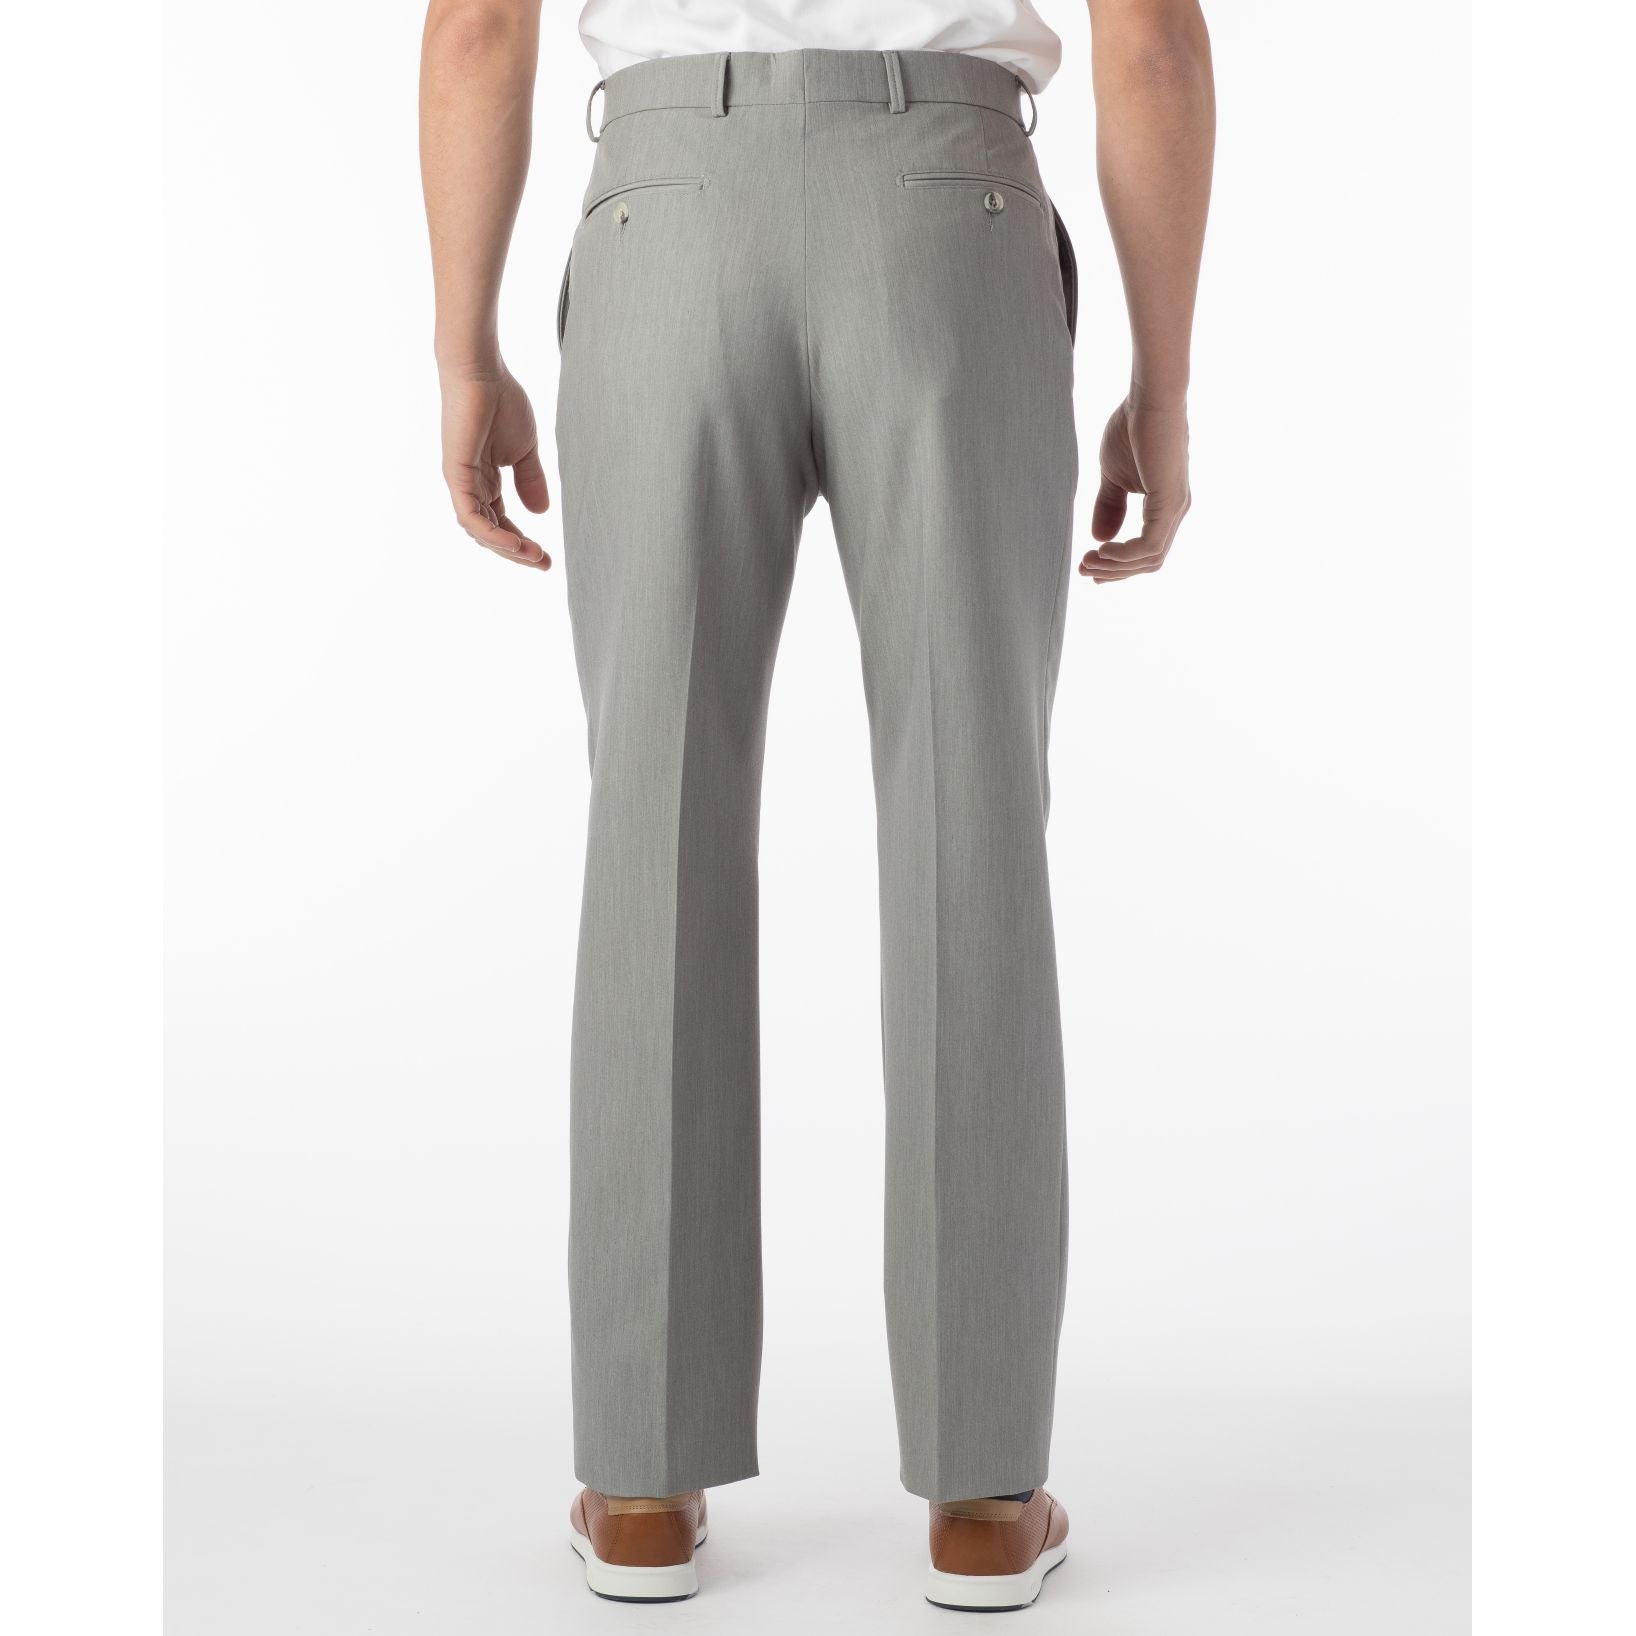 Comfort-EZE Commuter Bi-Stretch Gabardine Trouser in Pearl Grey, Size 38 (Dunhill Traditional Fit) by Ballin